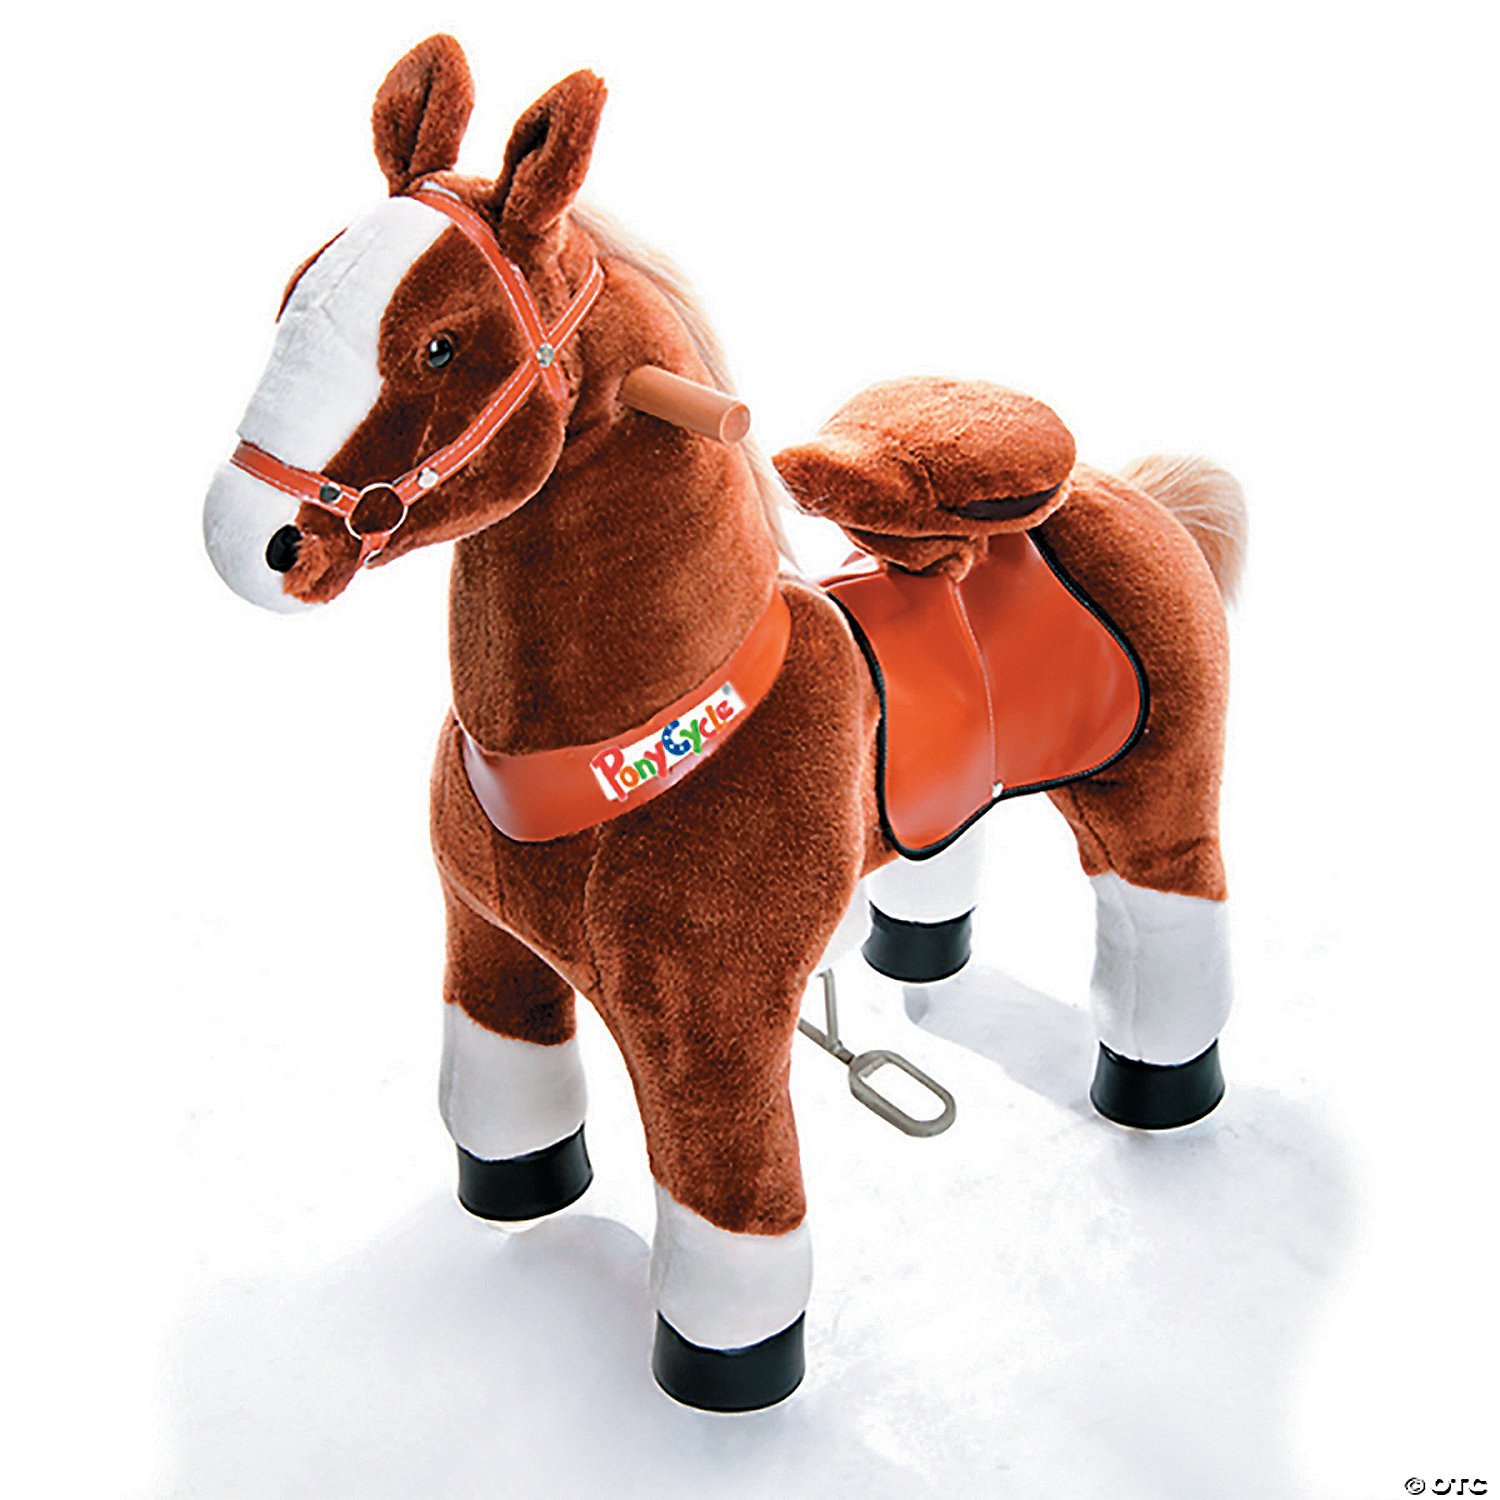 Ride-on Plush Brown & White Horse - Discontinued